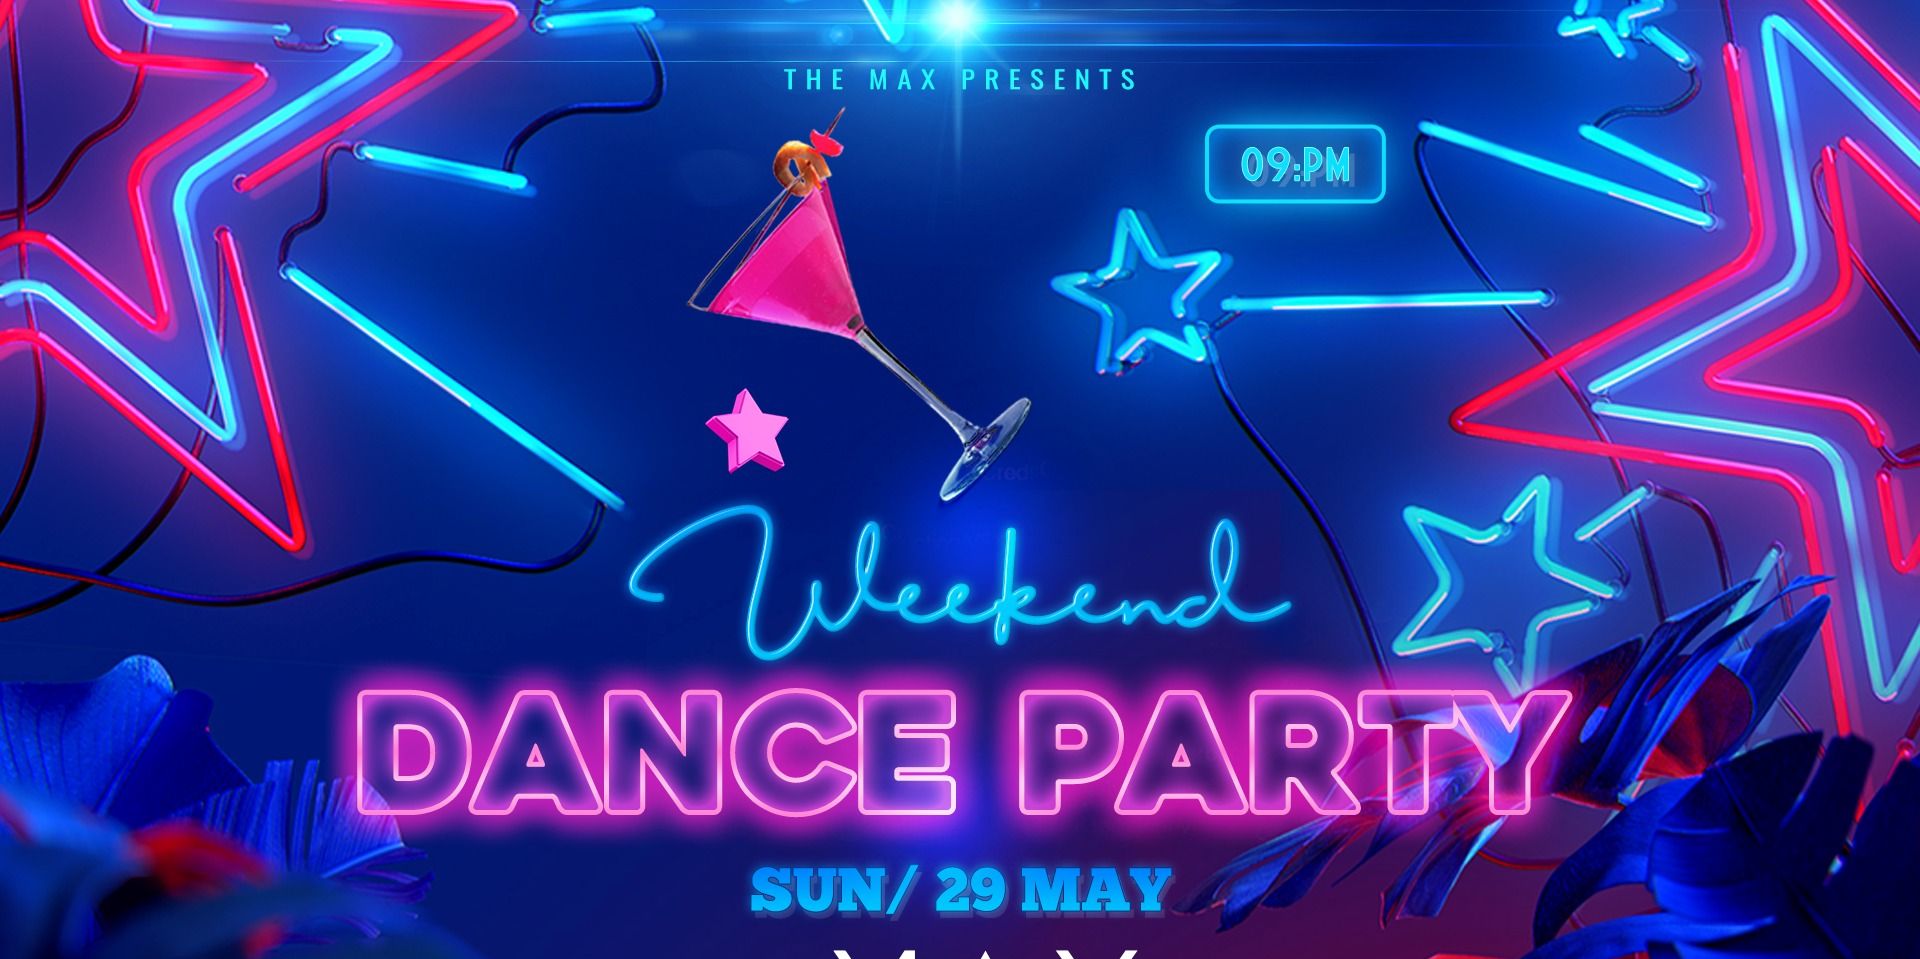 Dance Party promotional image